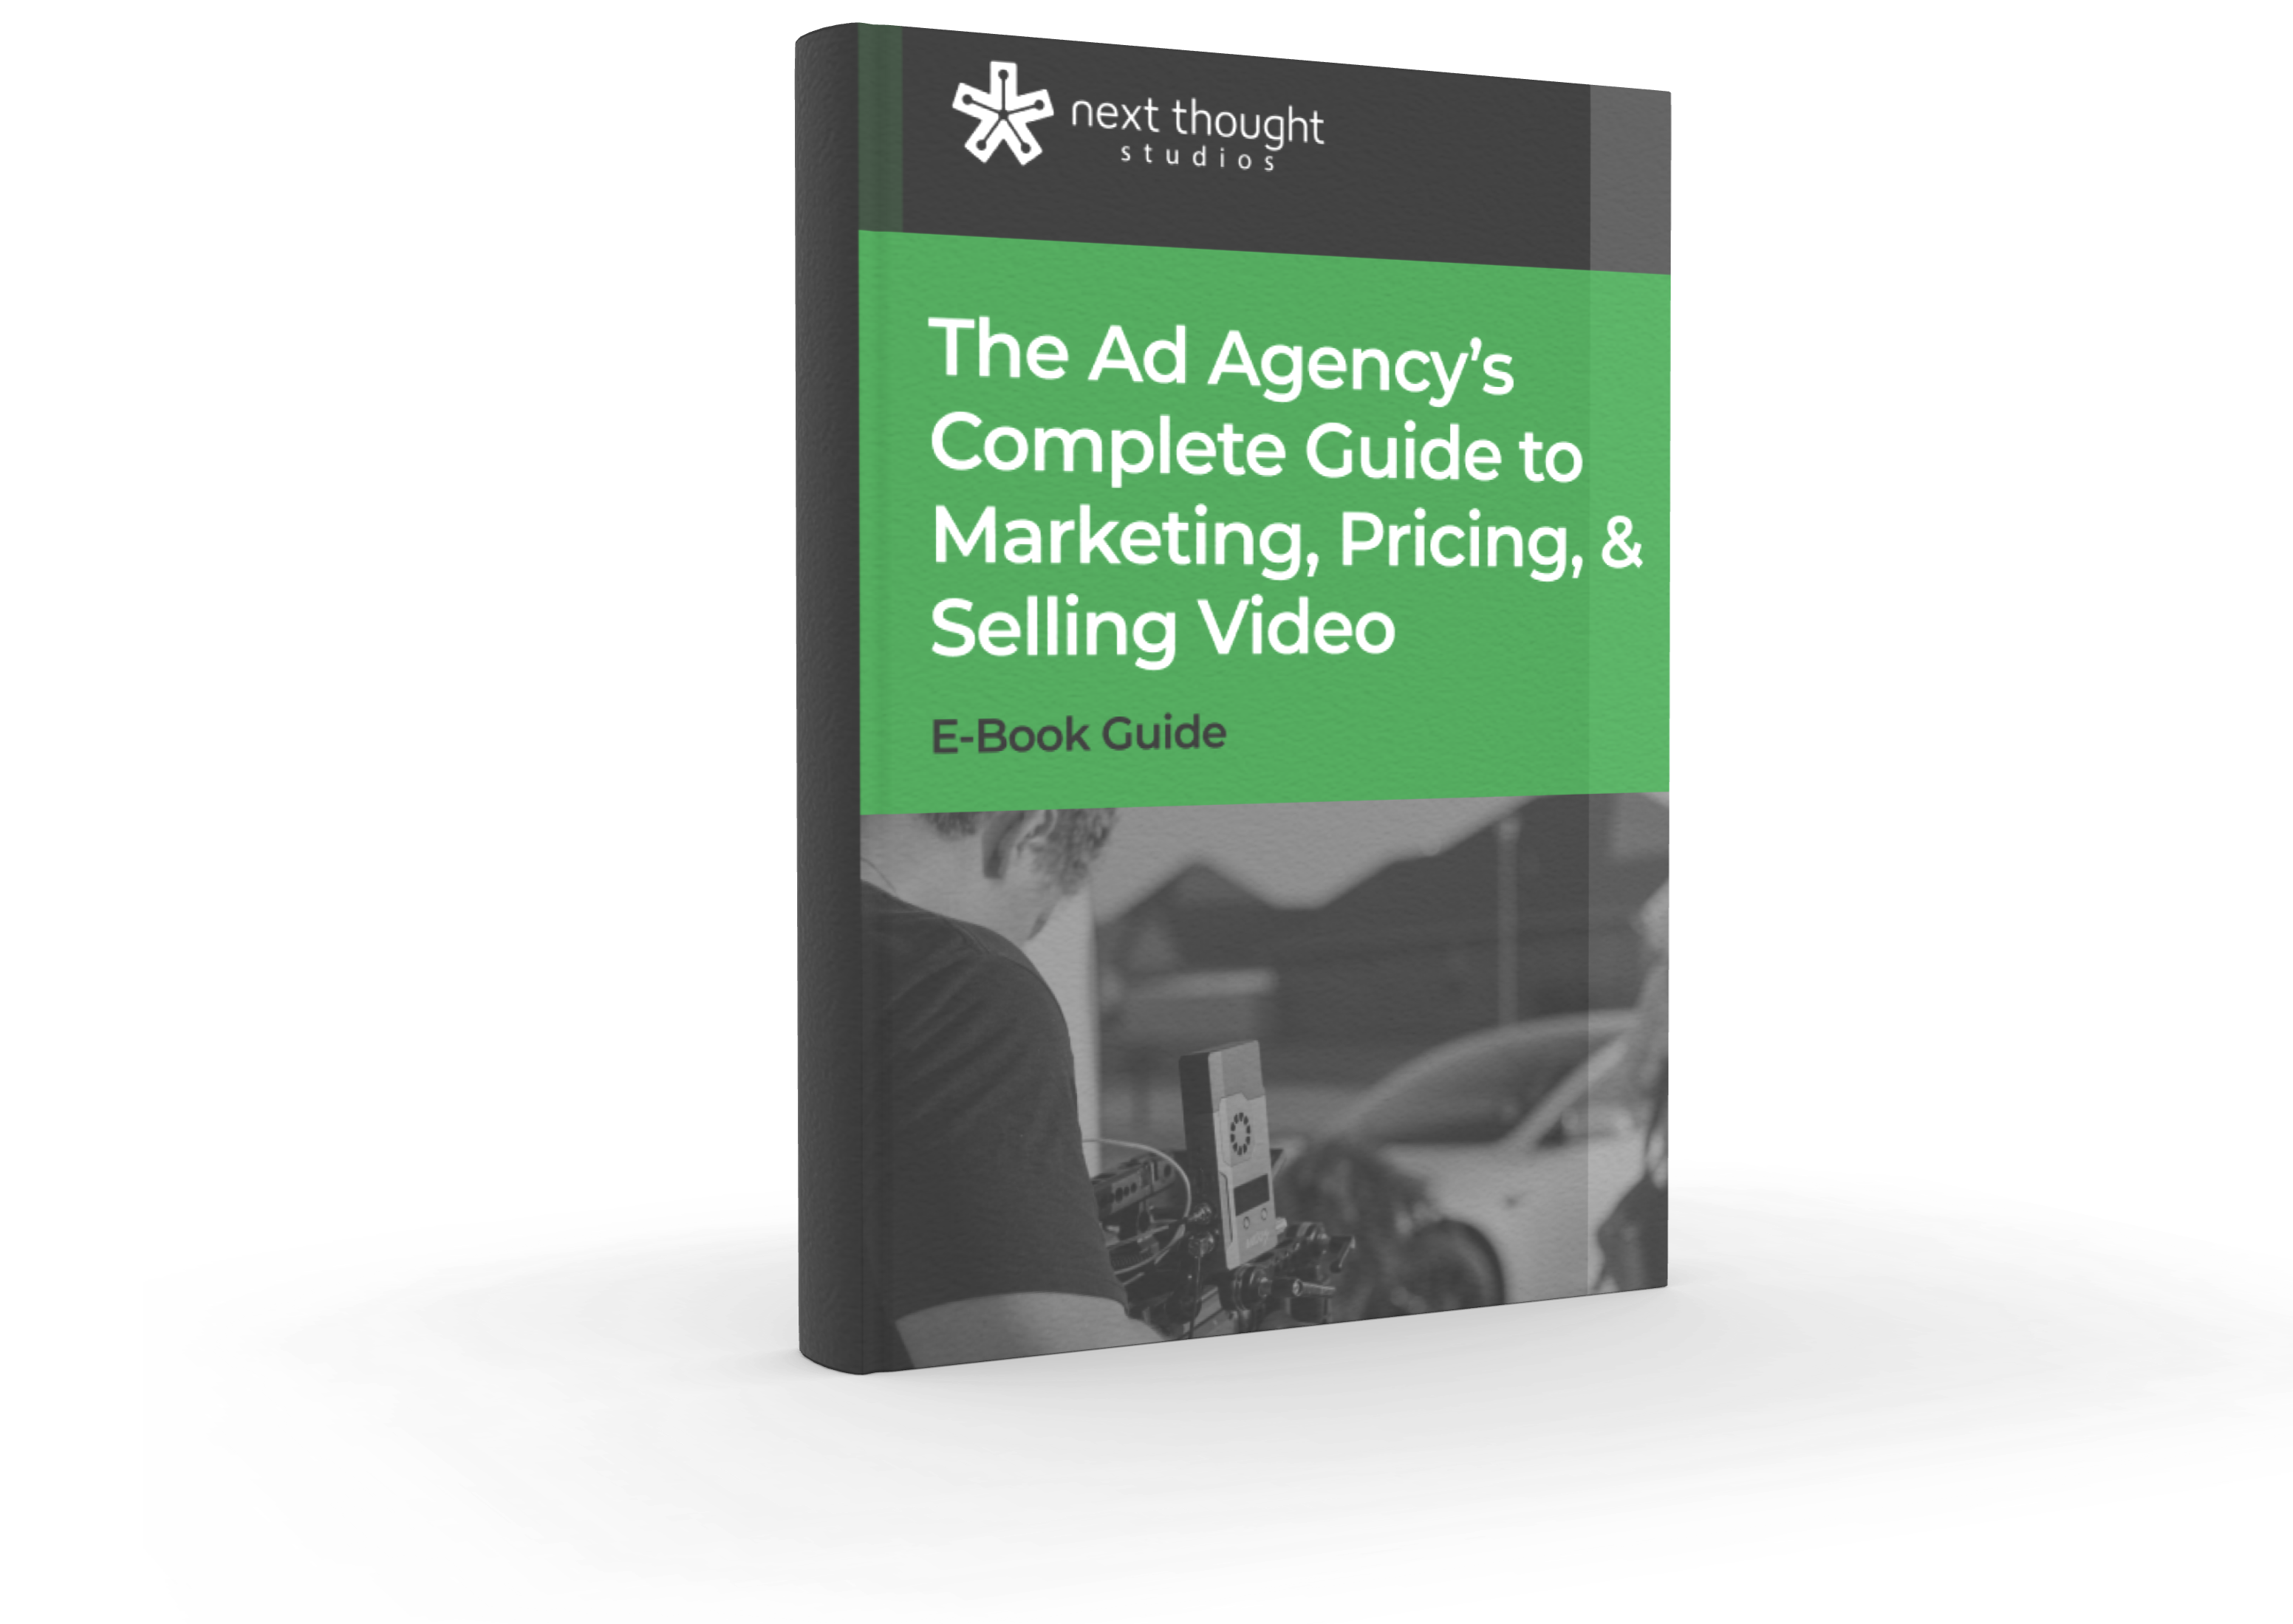 Mockup - The Ad Agency’s Complete Guide to Marketing, Pricing, & Selling Video